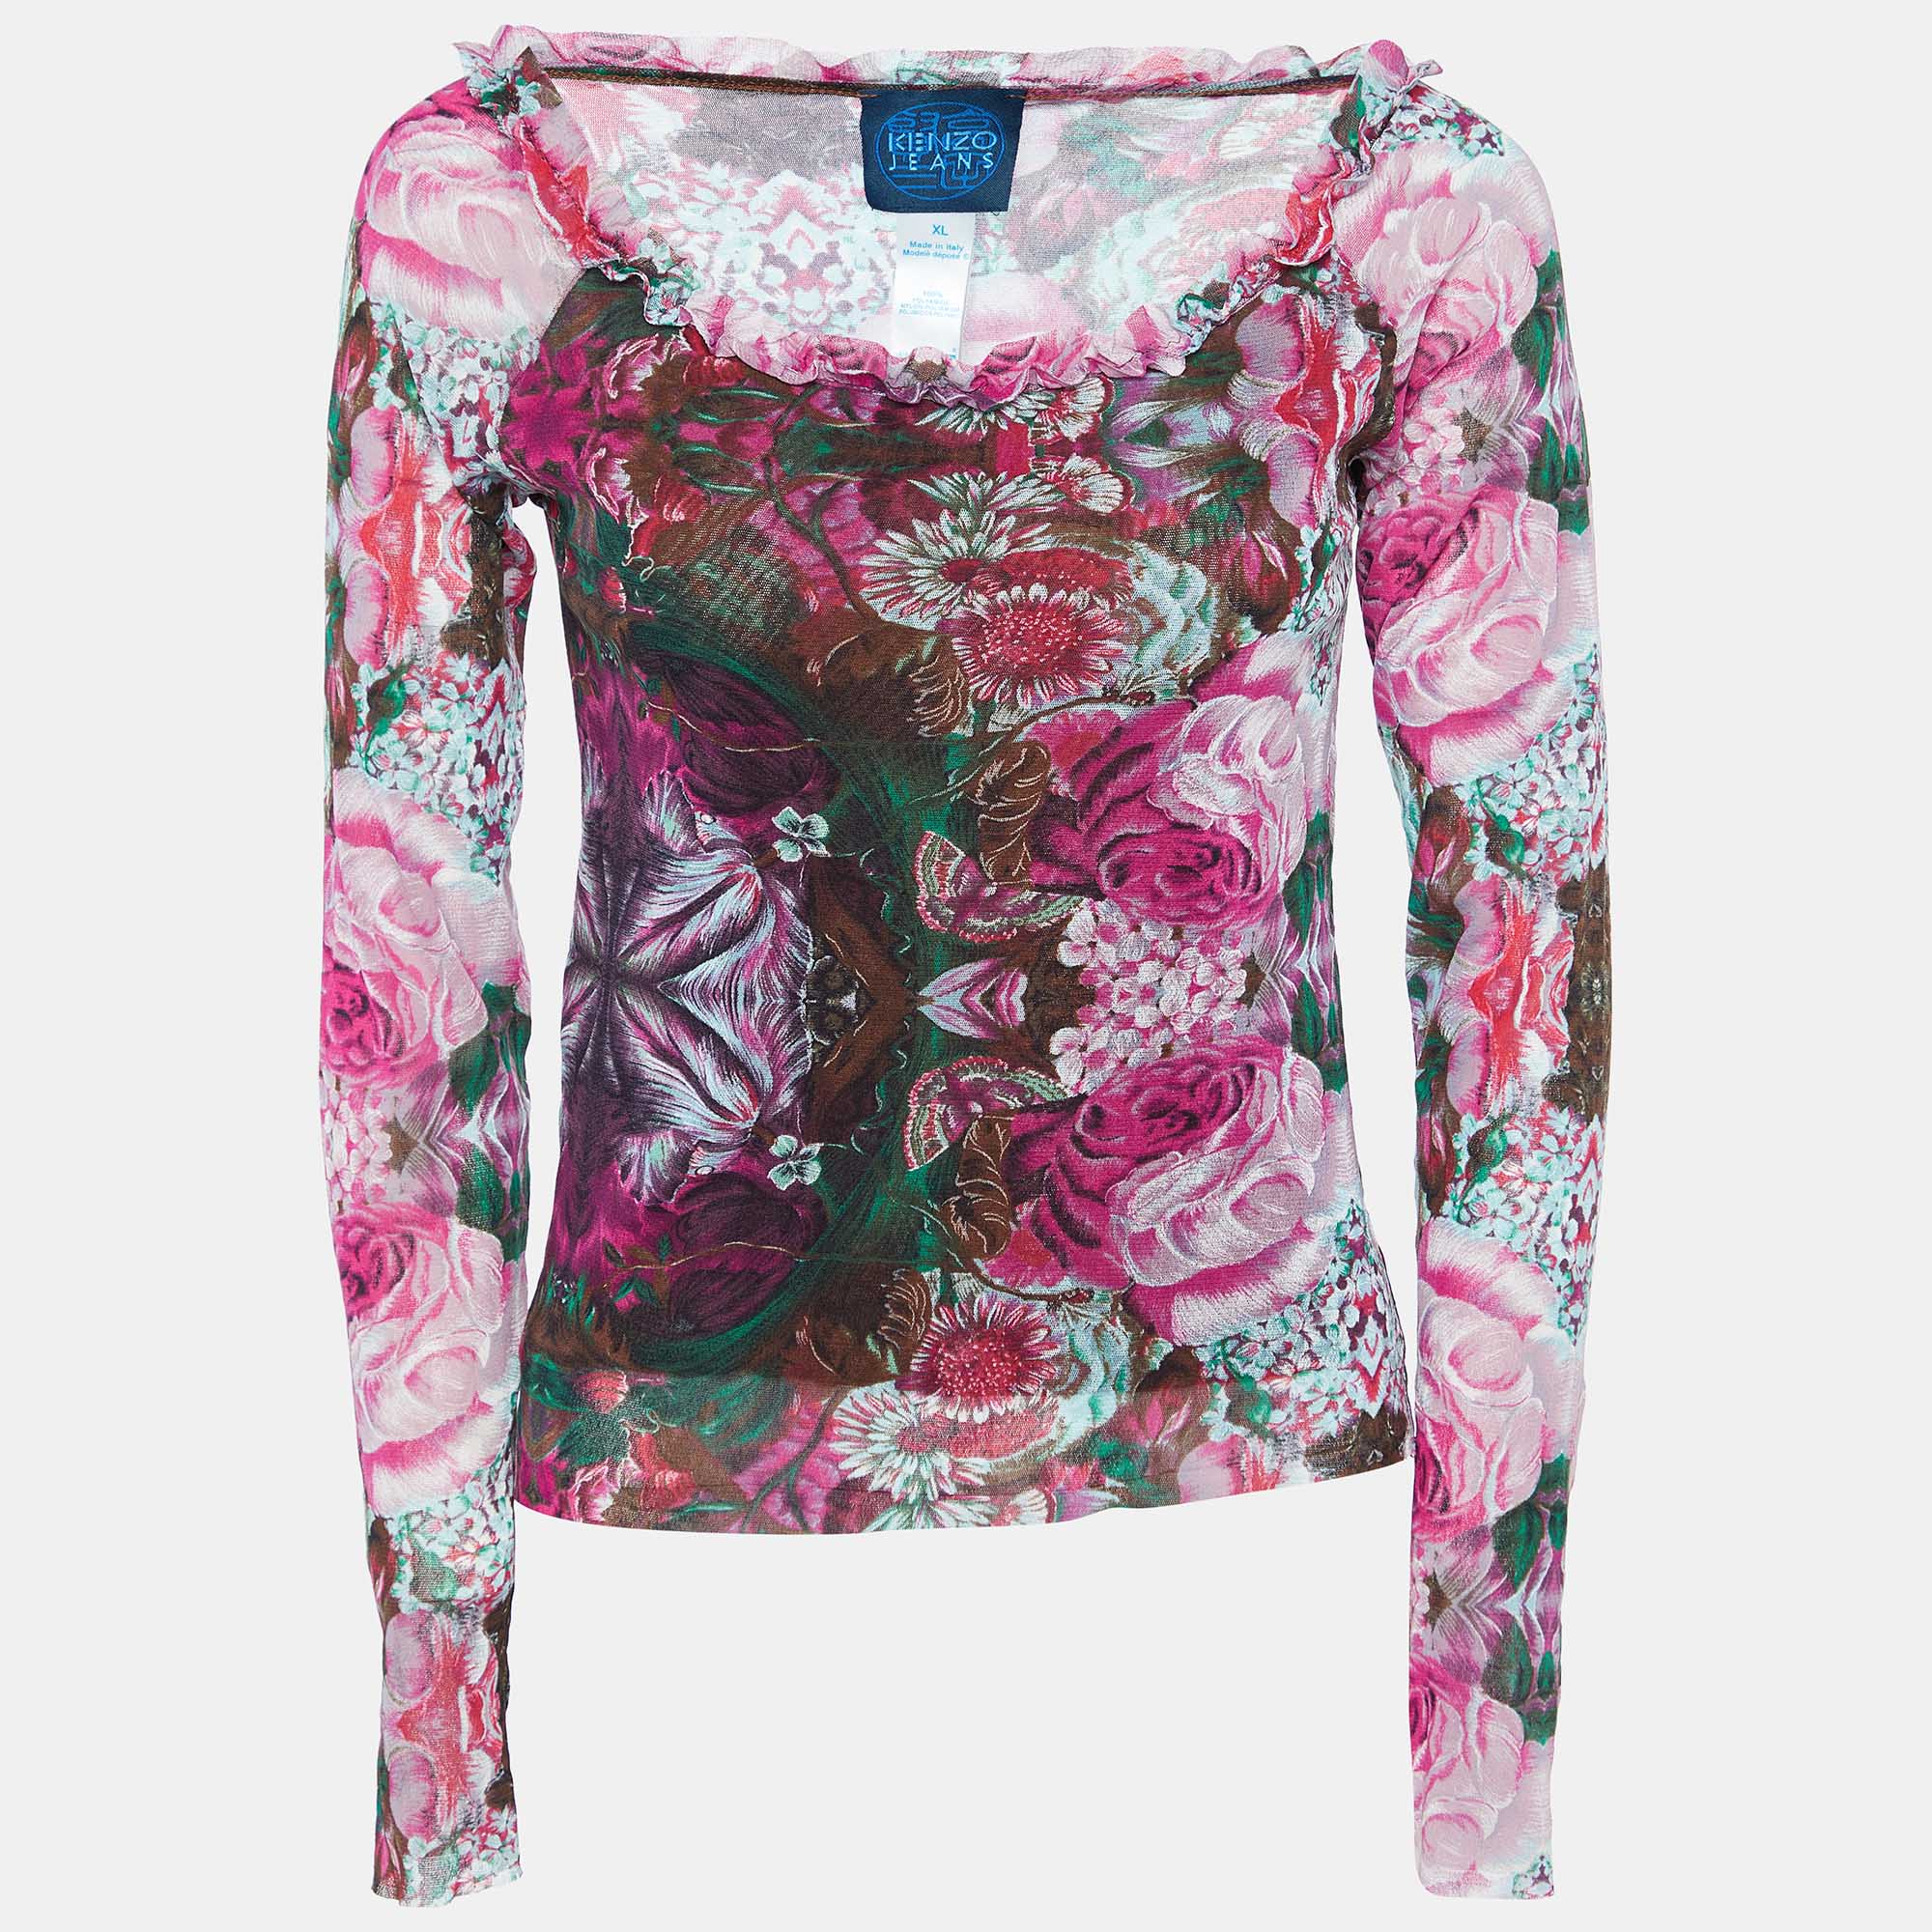 Kenzo Jeans Pink Floral Print Knit Ruffled Neck Top XL